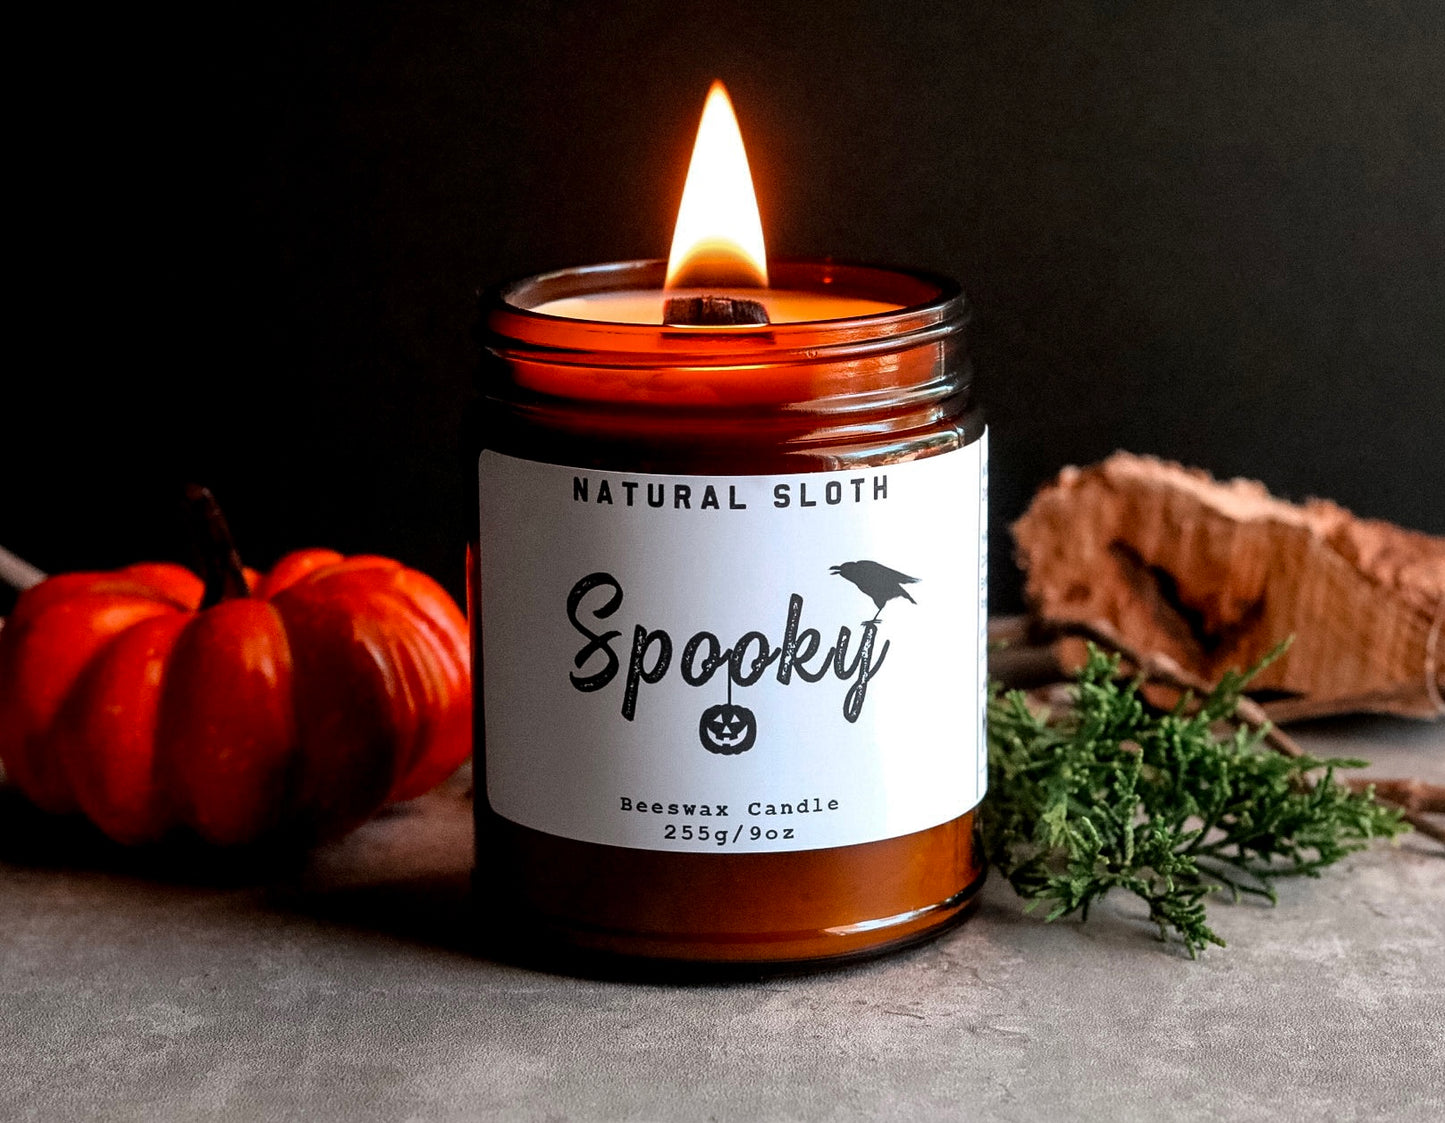 Spooky Beeswax Candles with Essential Oils